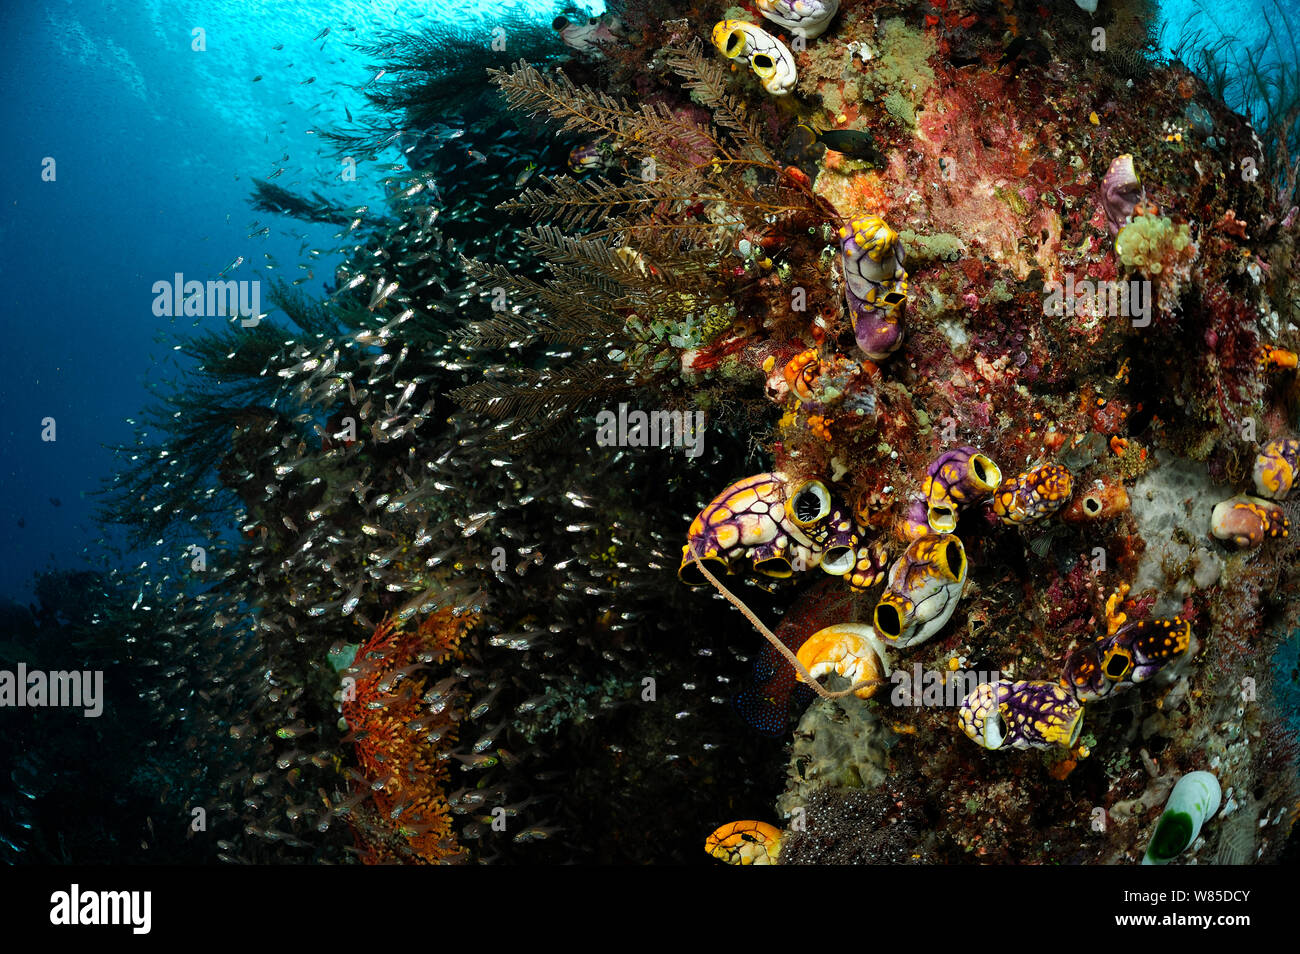 Rich reef landscape with Ox heart ascidian (Polycarpa aurata) and Reef fish, Raja Ampat, West Papua, Indonesia, Pacific Ocean. Stock Photo